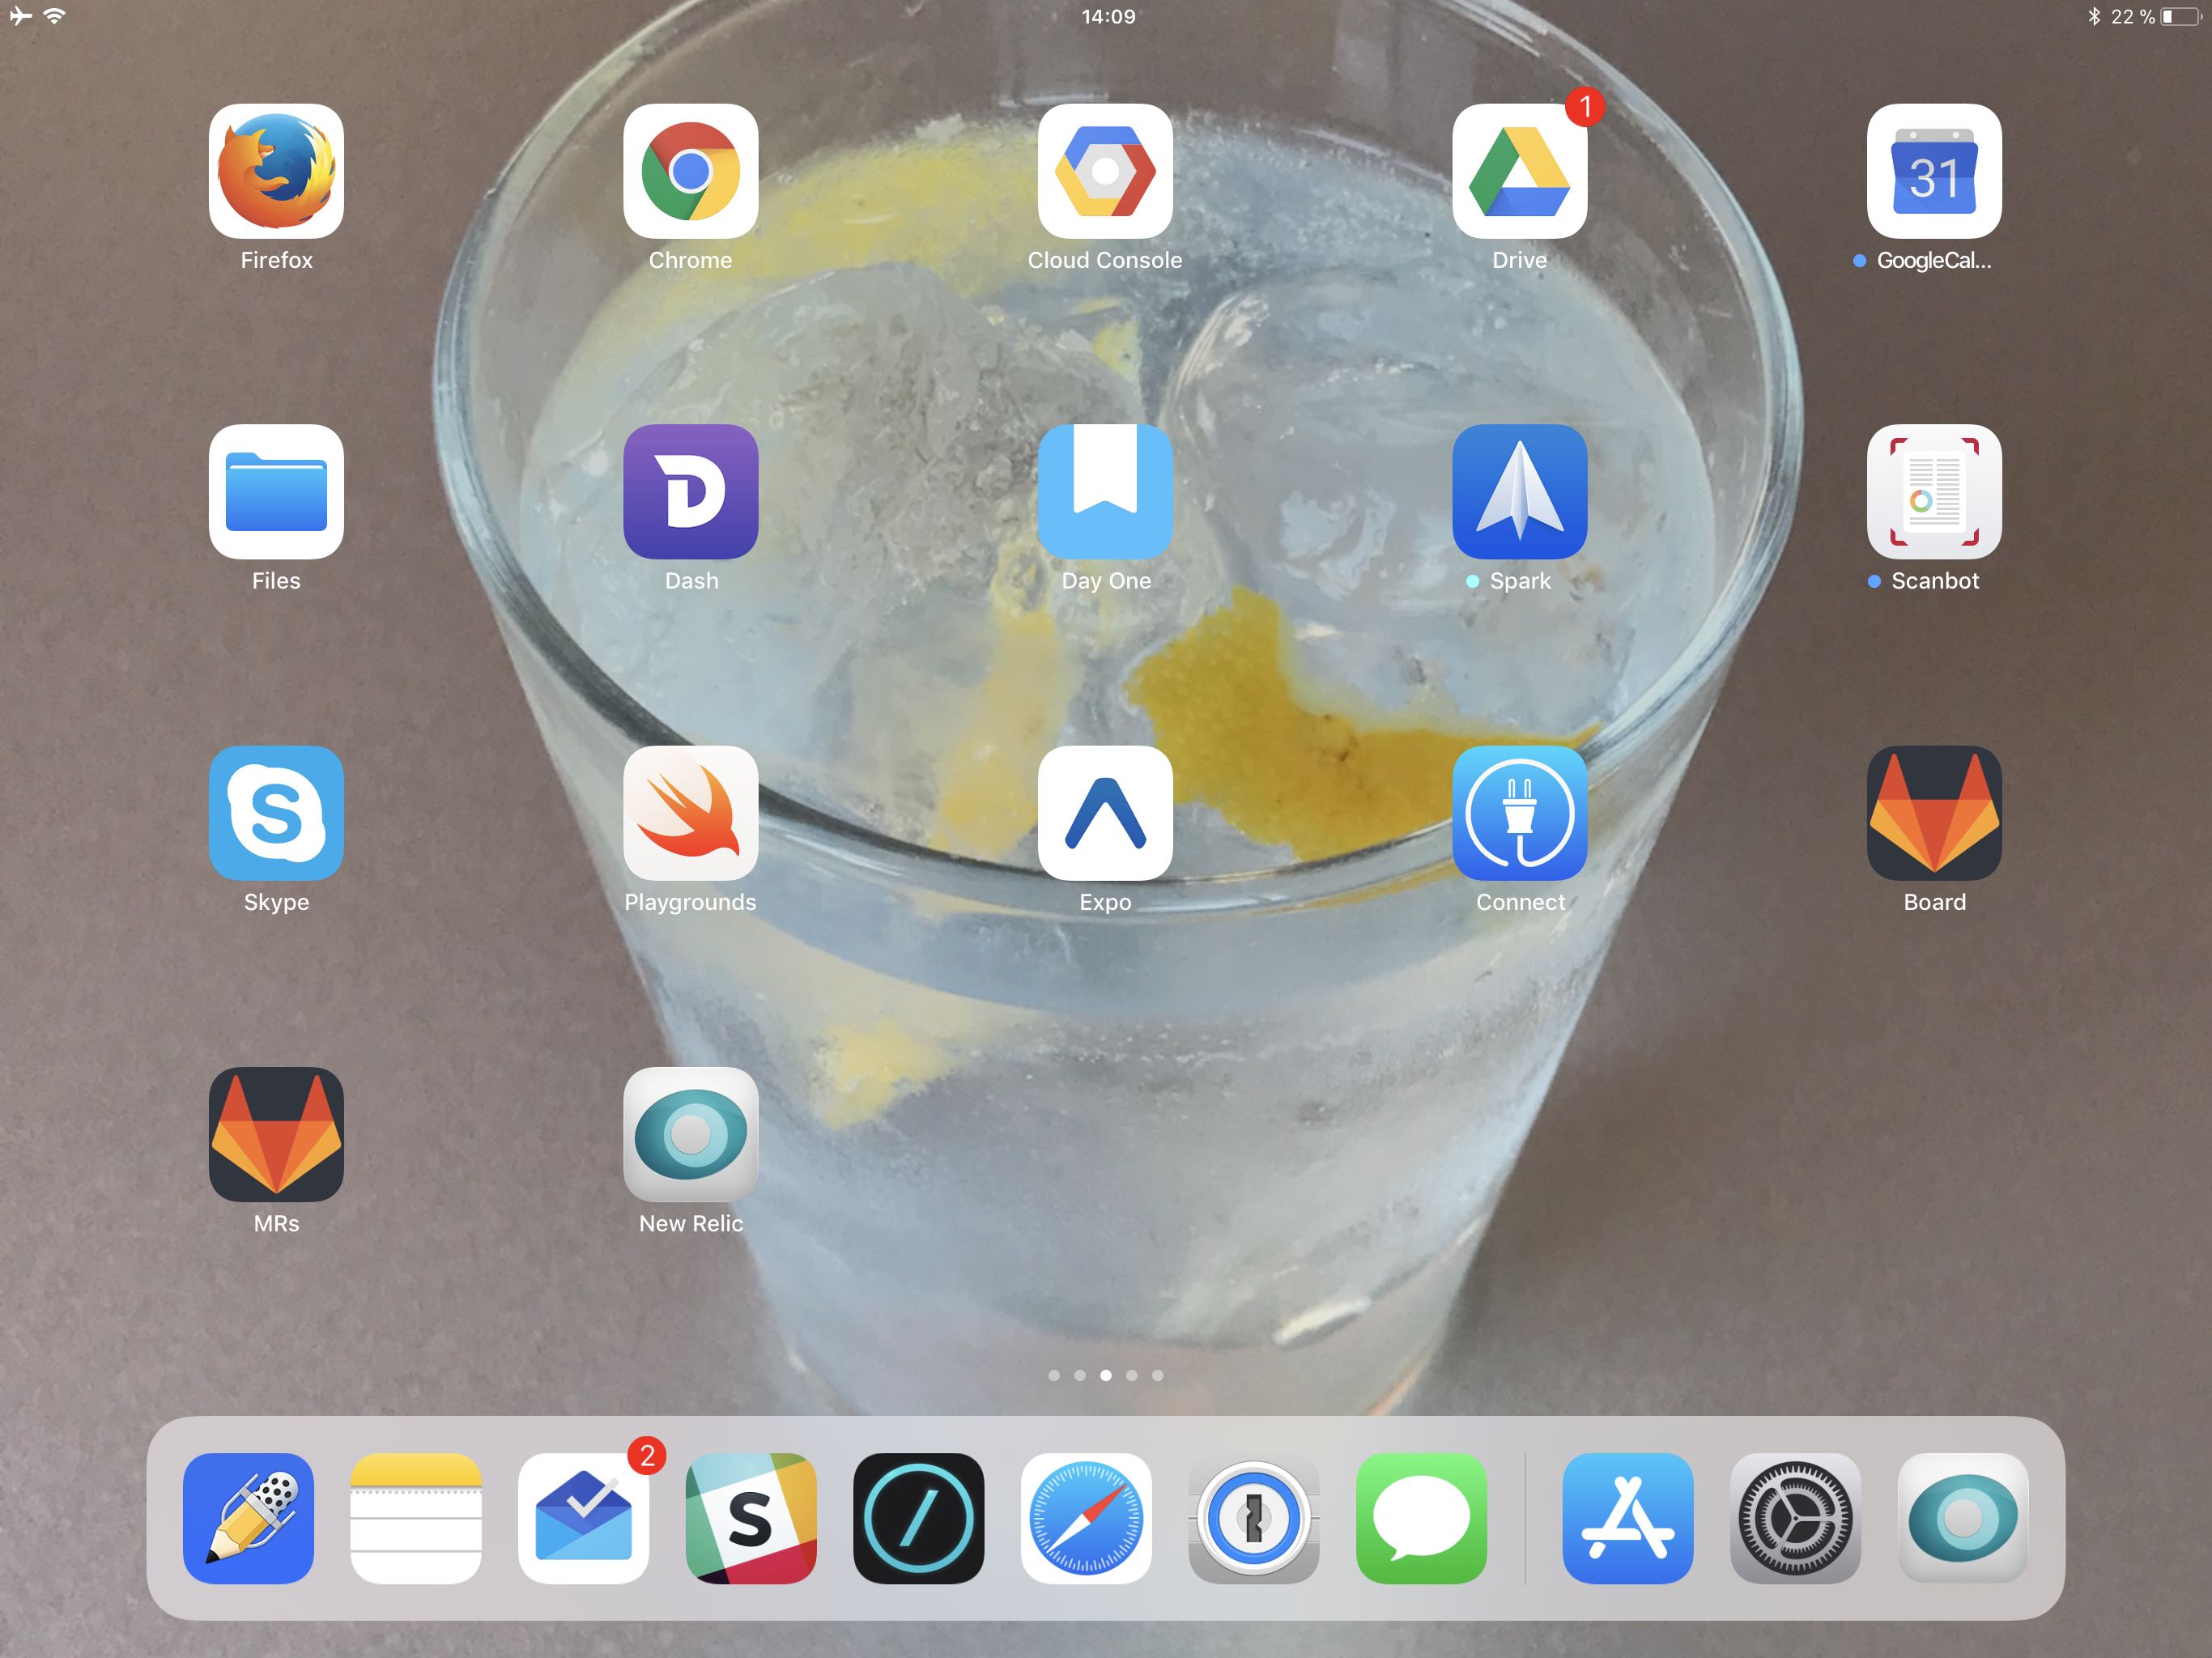 iPad Pro home screen with work apps